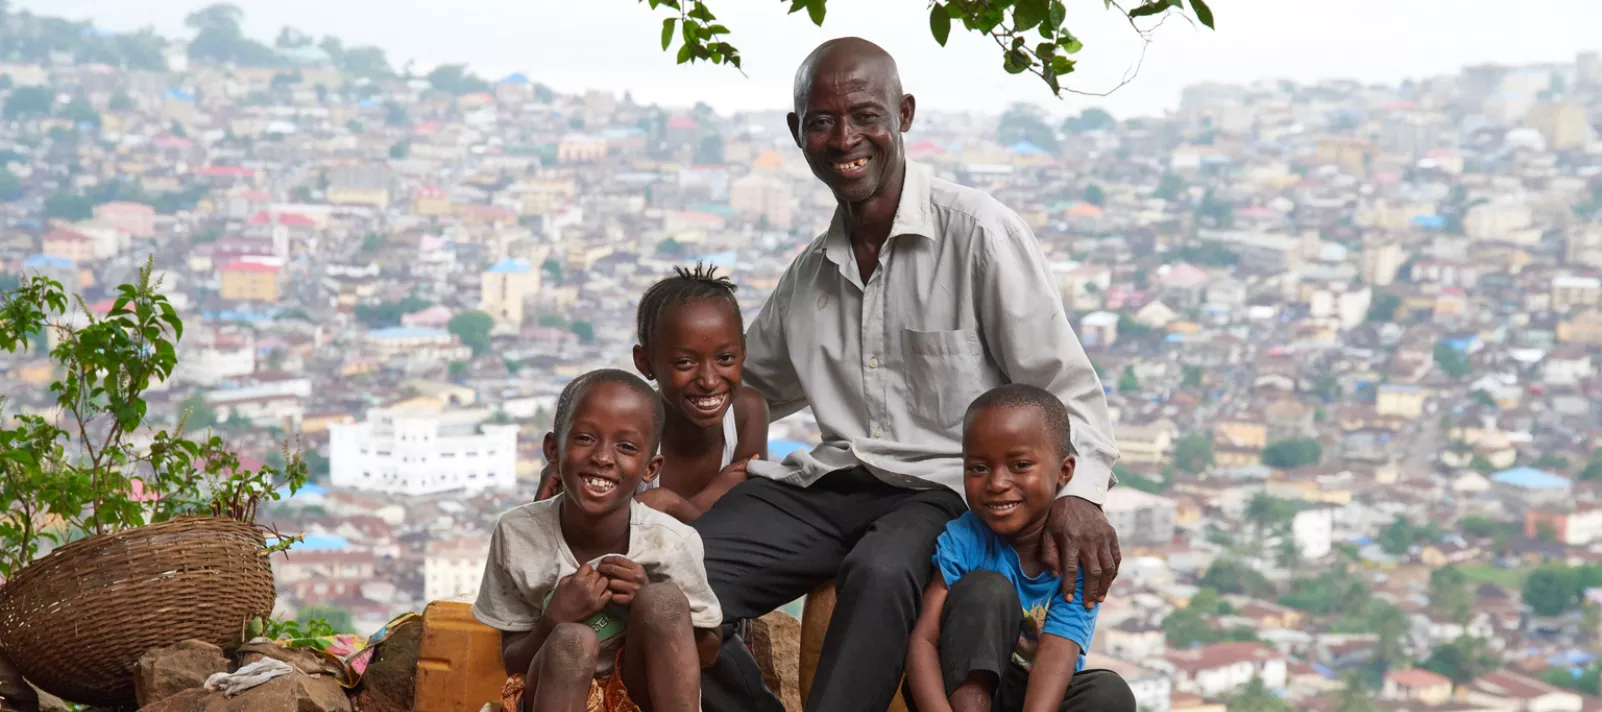 Sulaiman Samura with three of his children, from left, Fatmata, 10 years old, Kabba, 7 years old and Jonathan, 5 years old in the the suburb of Hilltop, Freetown, Sierra Leone on May 30, 2017. 